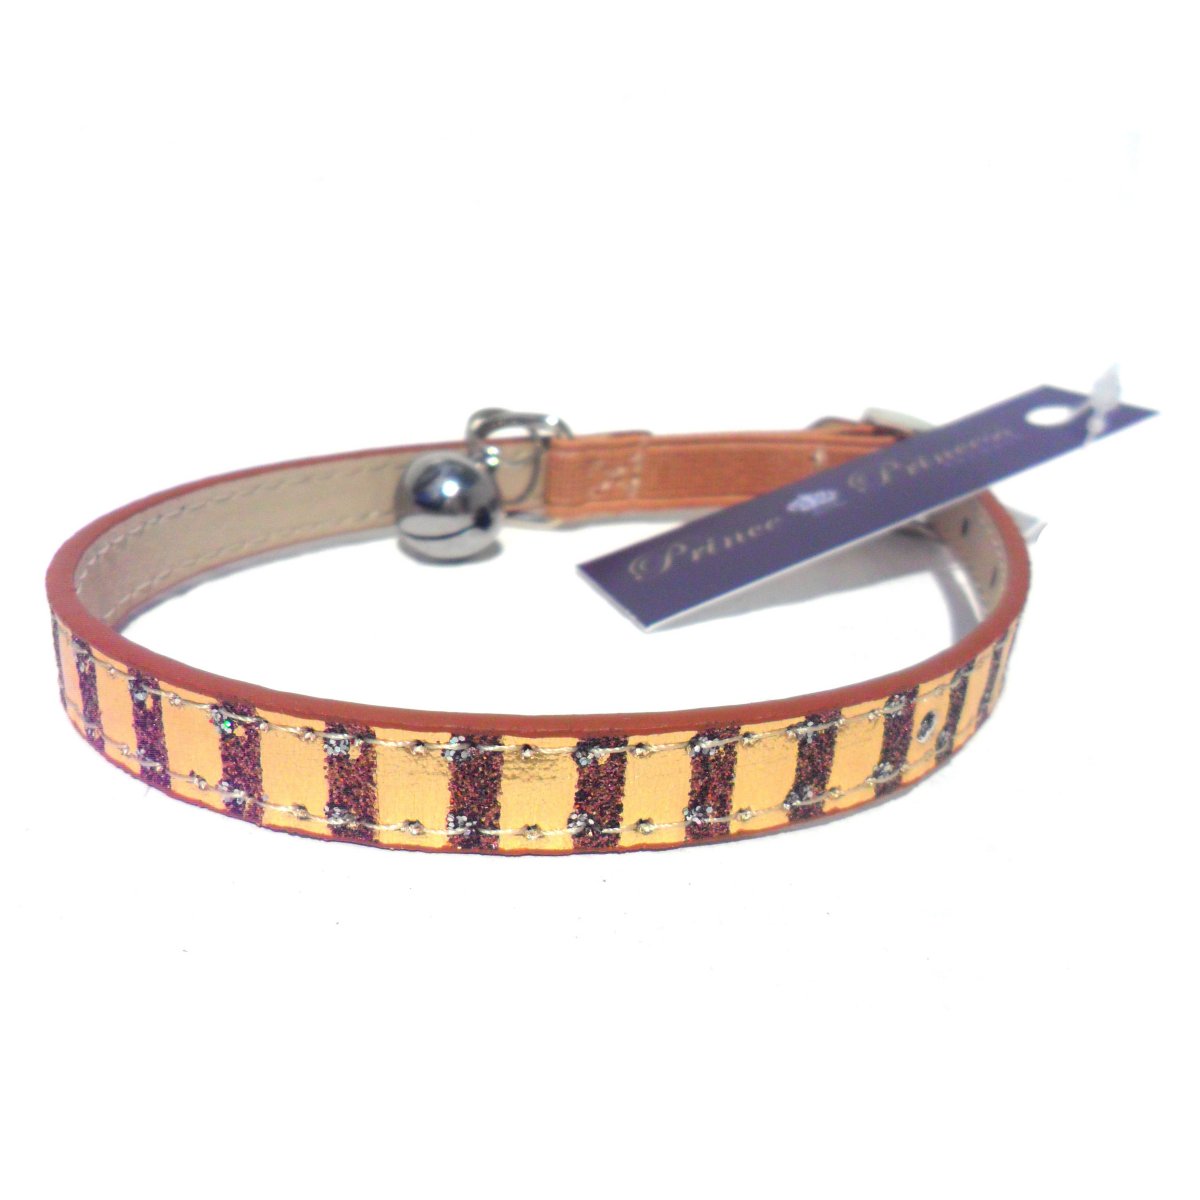 Metallic Striped Cat Kitten Collars Cat Collars | Clothes for Cats